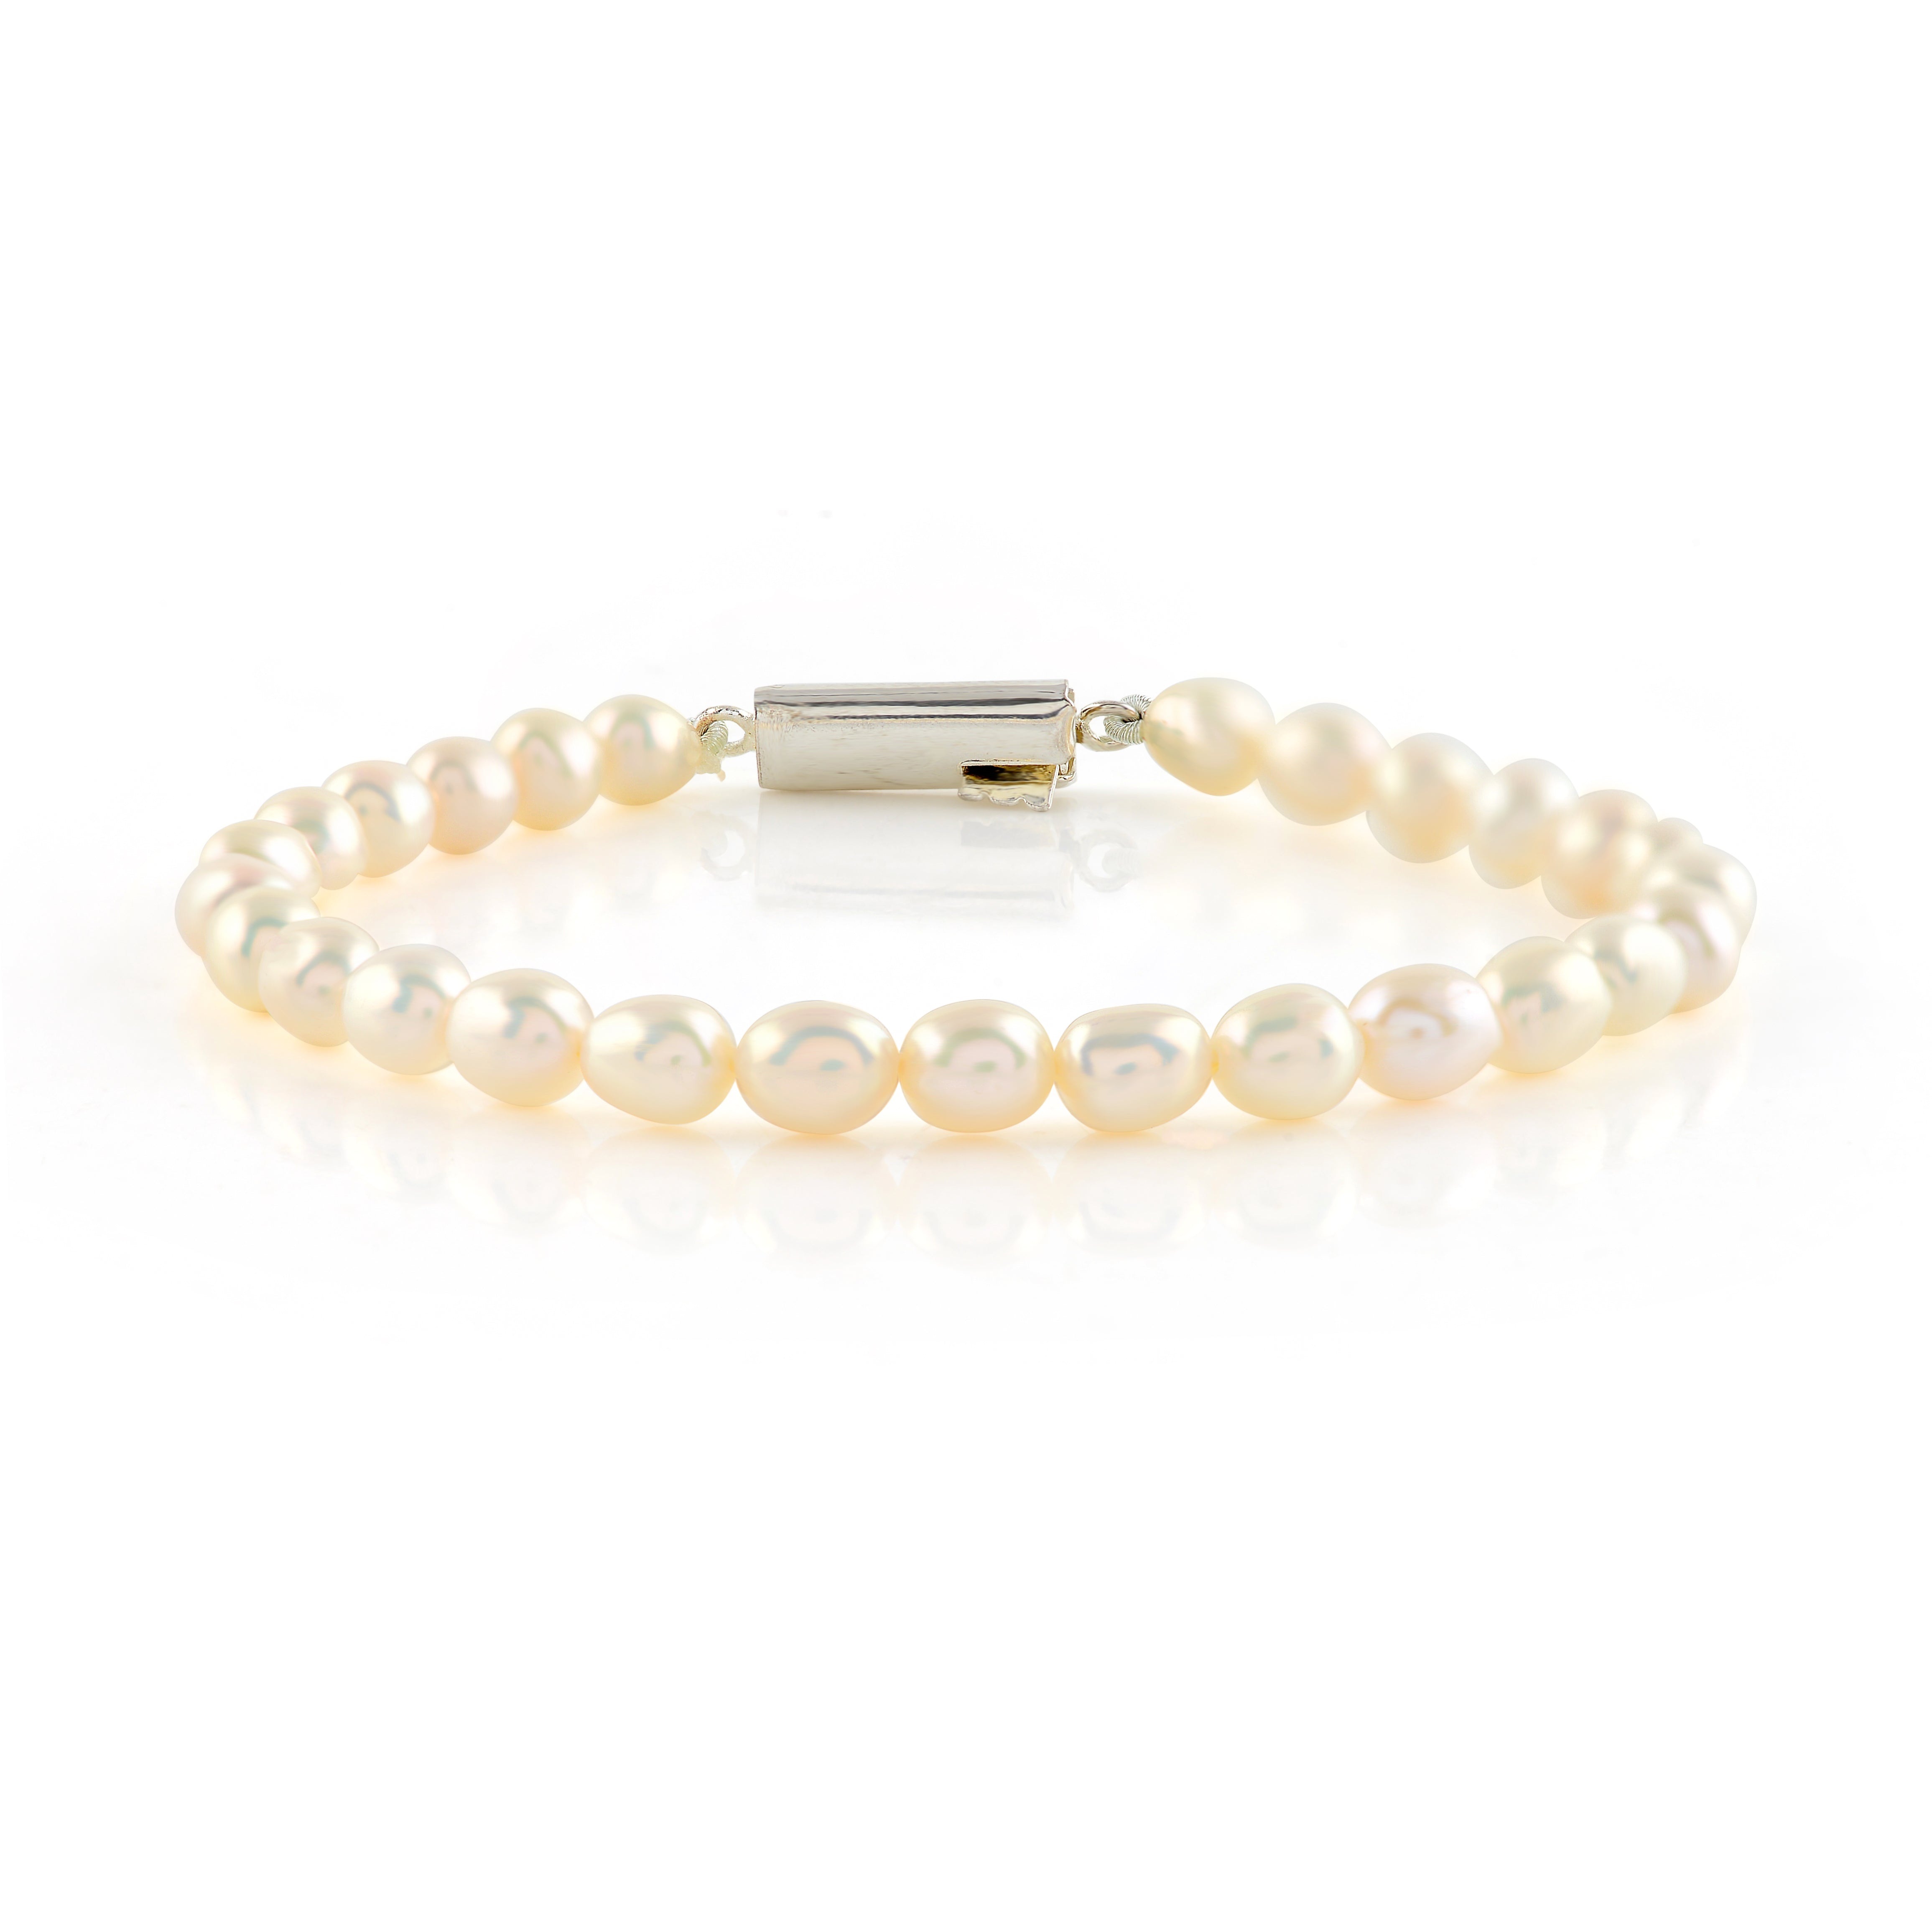 White freshwater pearl bracelet with a silver clasp